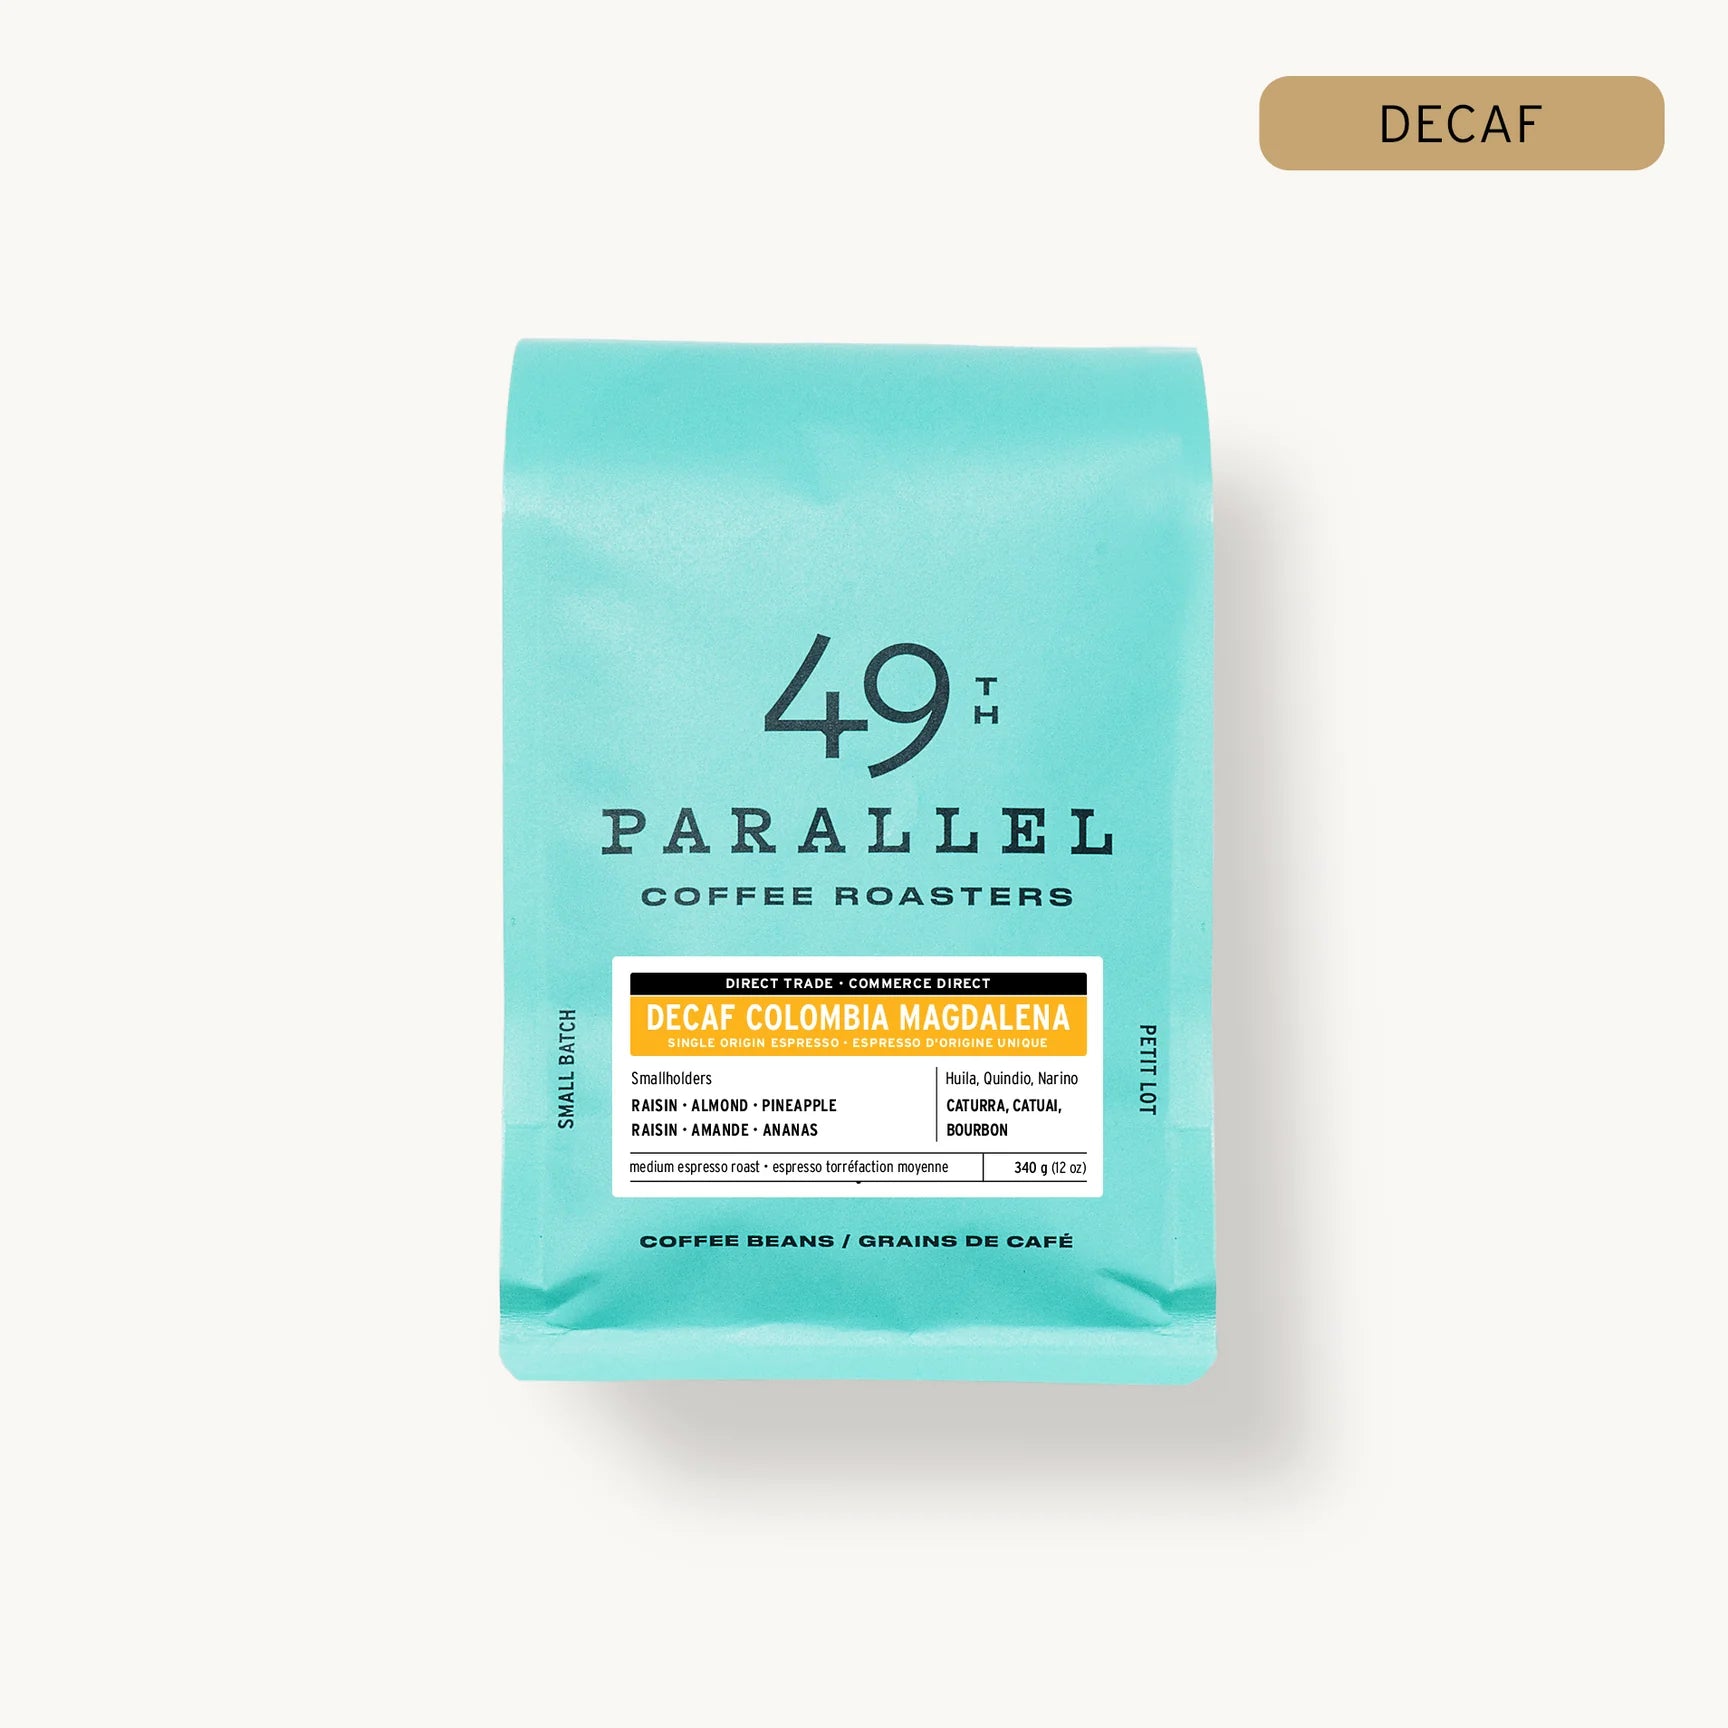 Colombia Magdalena Decaf from 49th Parallel Coffee Roasters. Experience the flavors of almond, pineapple, and raisin in this medium espresso roast. Direct trade coffee sourced from Colombia's Huila, Quindio, and Narino regions.